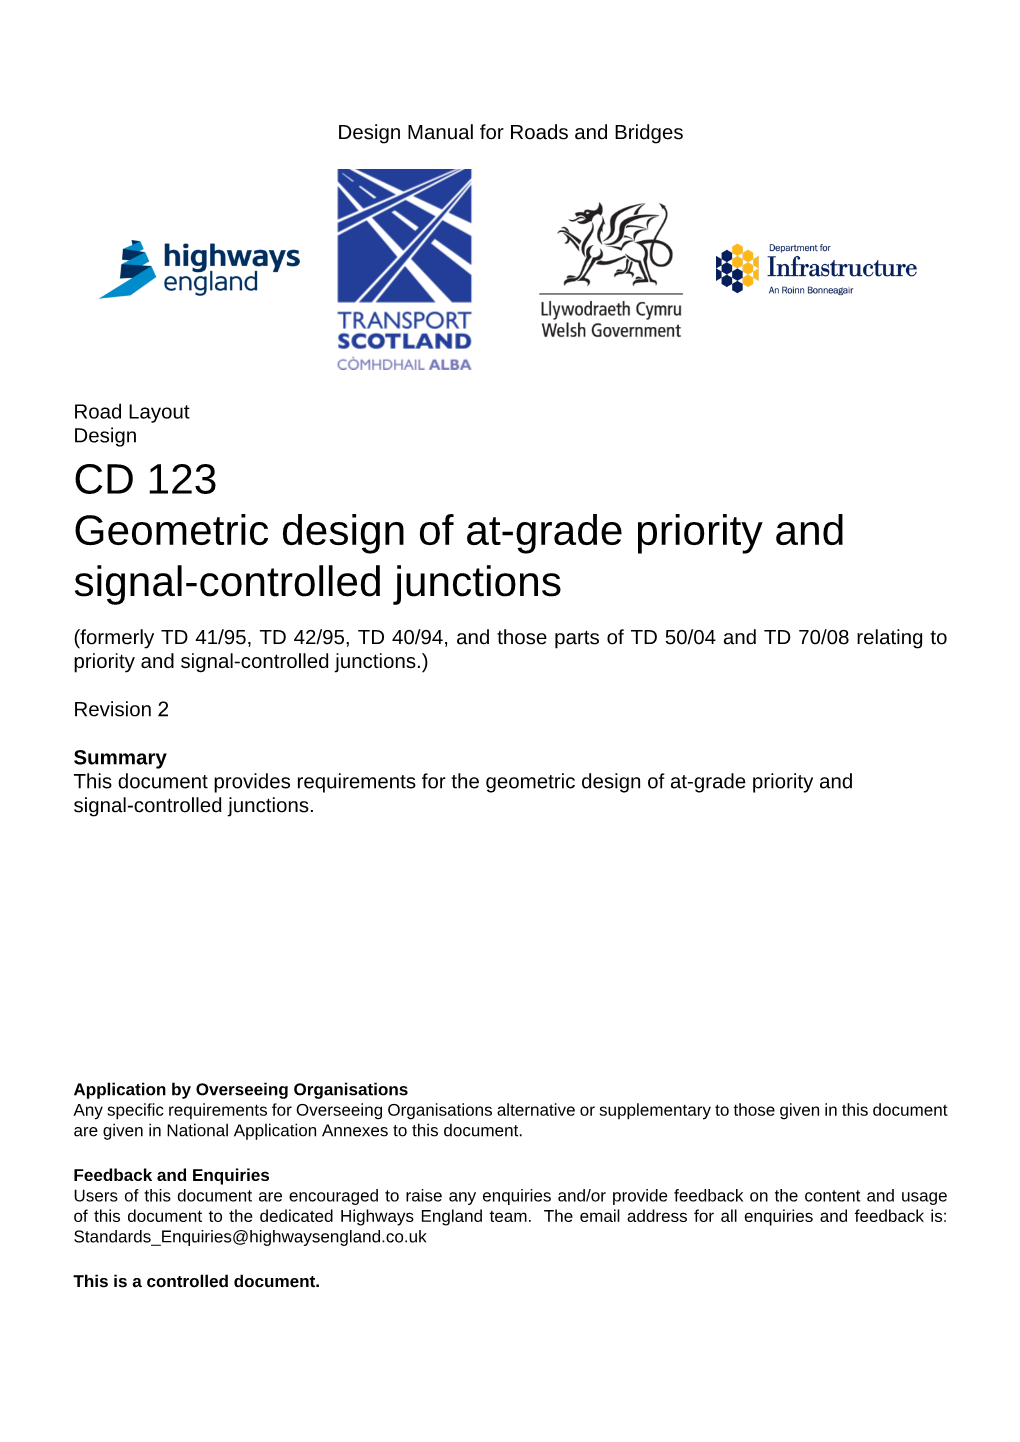 CD 123 Geometric Design of At-Grade Priority and Signal-Controlled Junctions